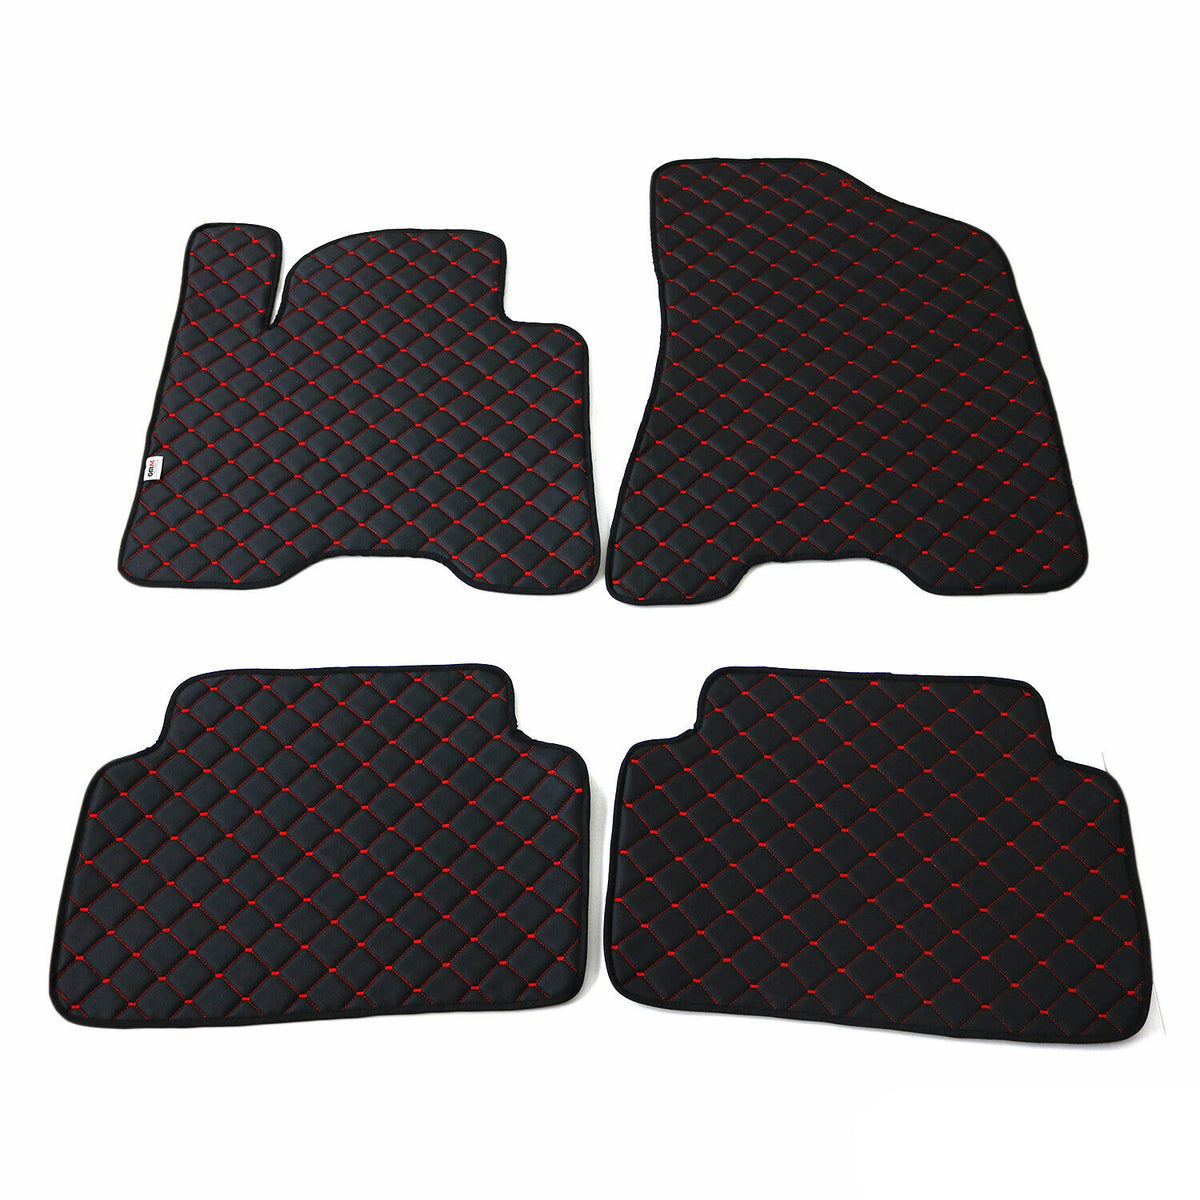 Floor mats leather car mat for Hyundai Tucson 2015-2020 artificial leather black red 4x